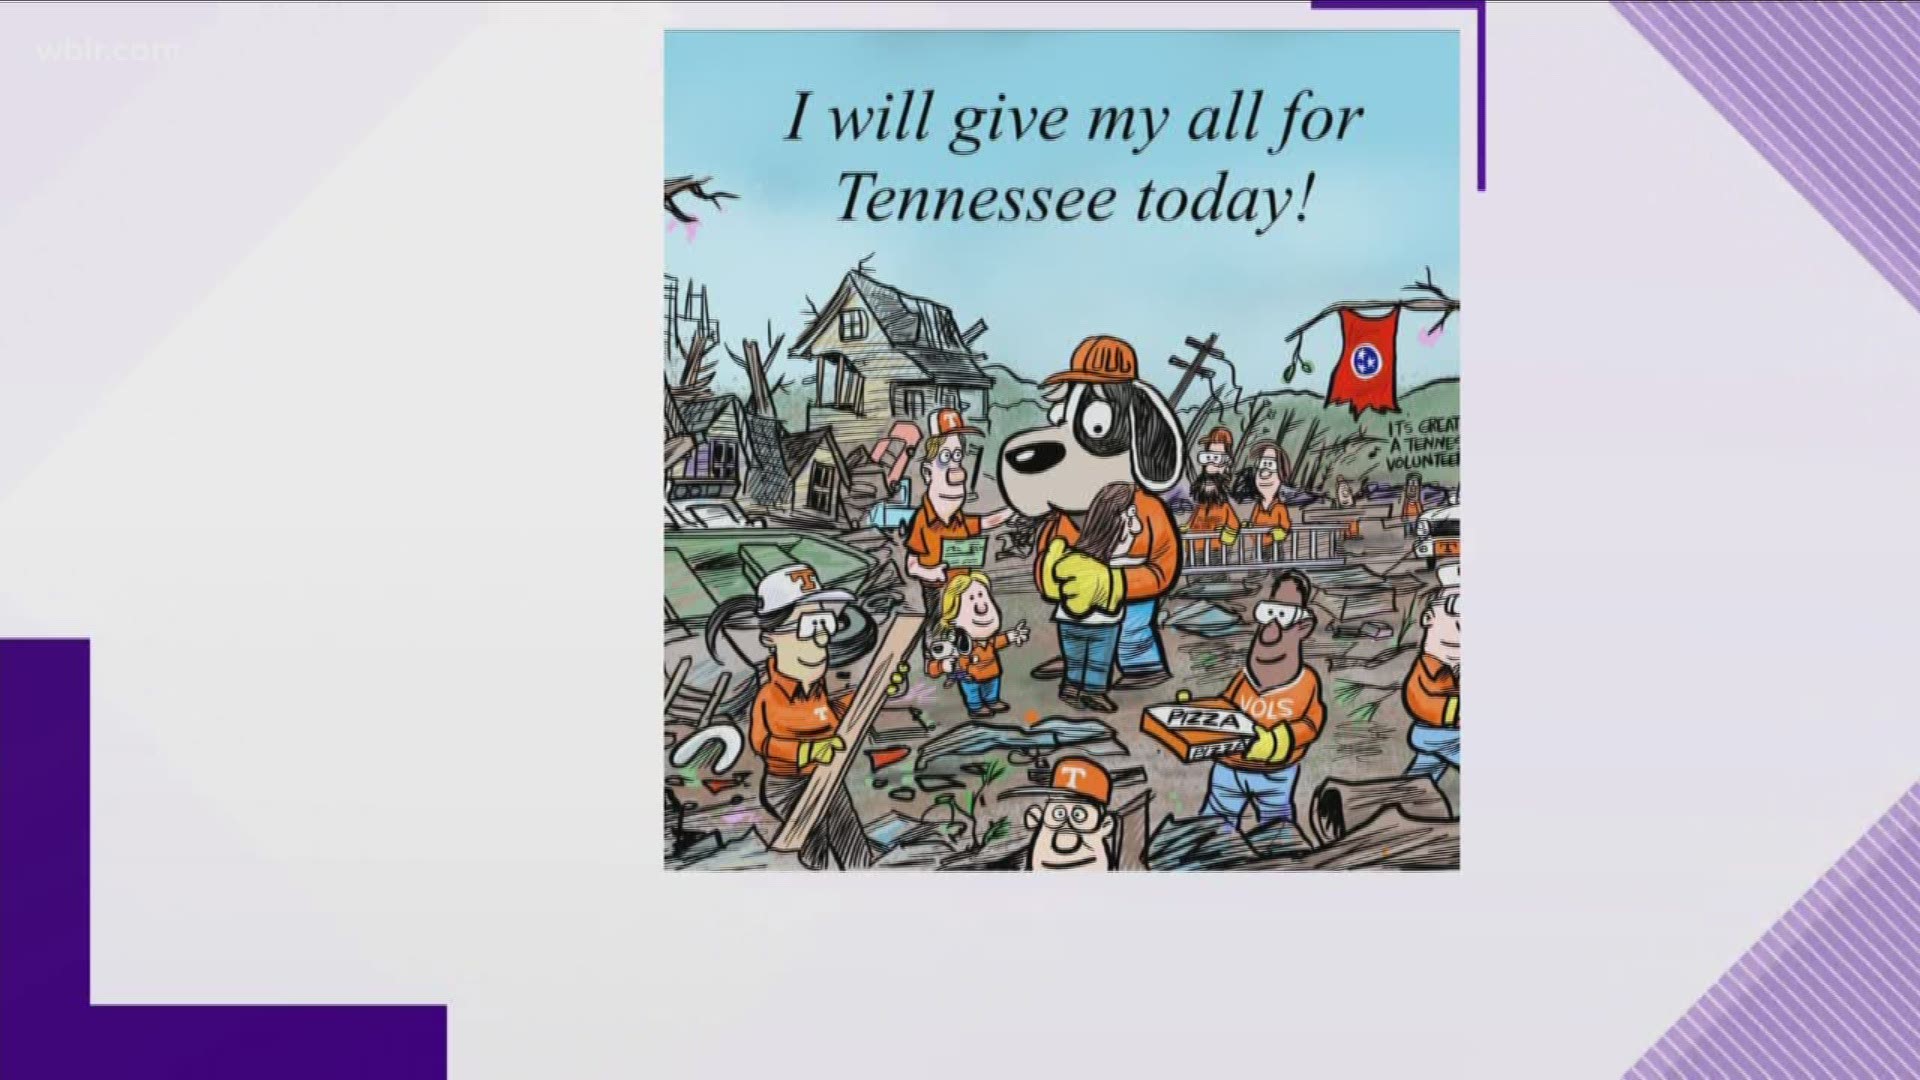 A University of Tennessee alum and cartoon artist is using his work to help the relief effort following the deadly Middle Tennessee tornadoes.